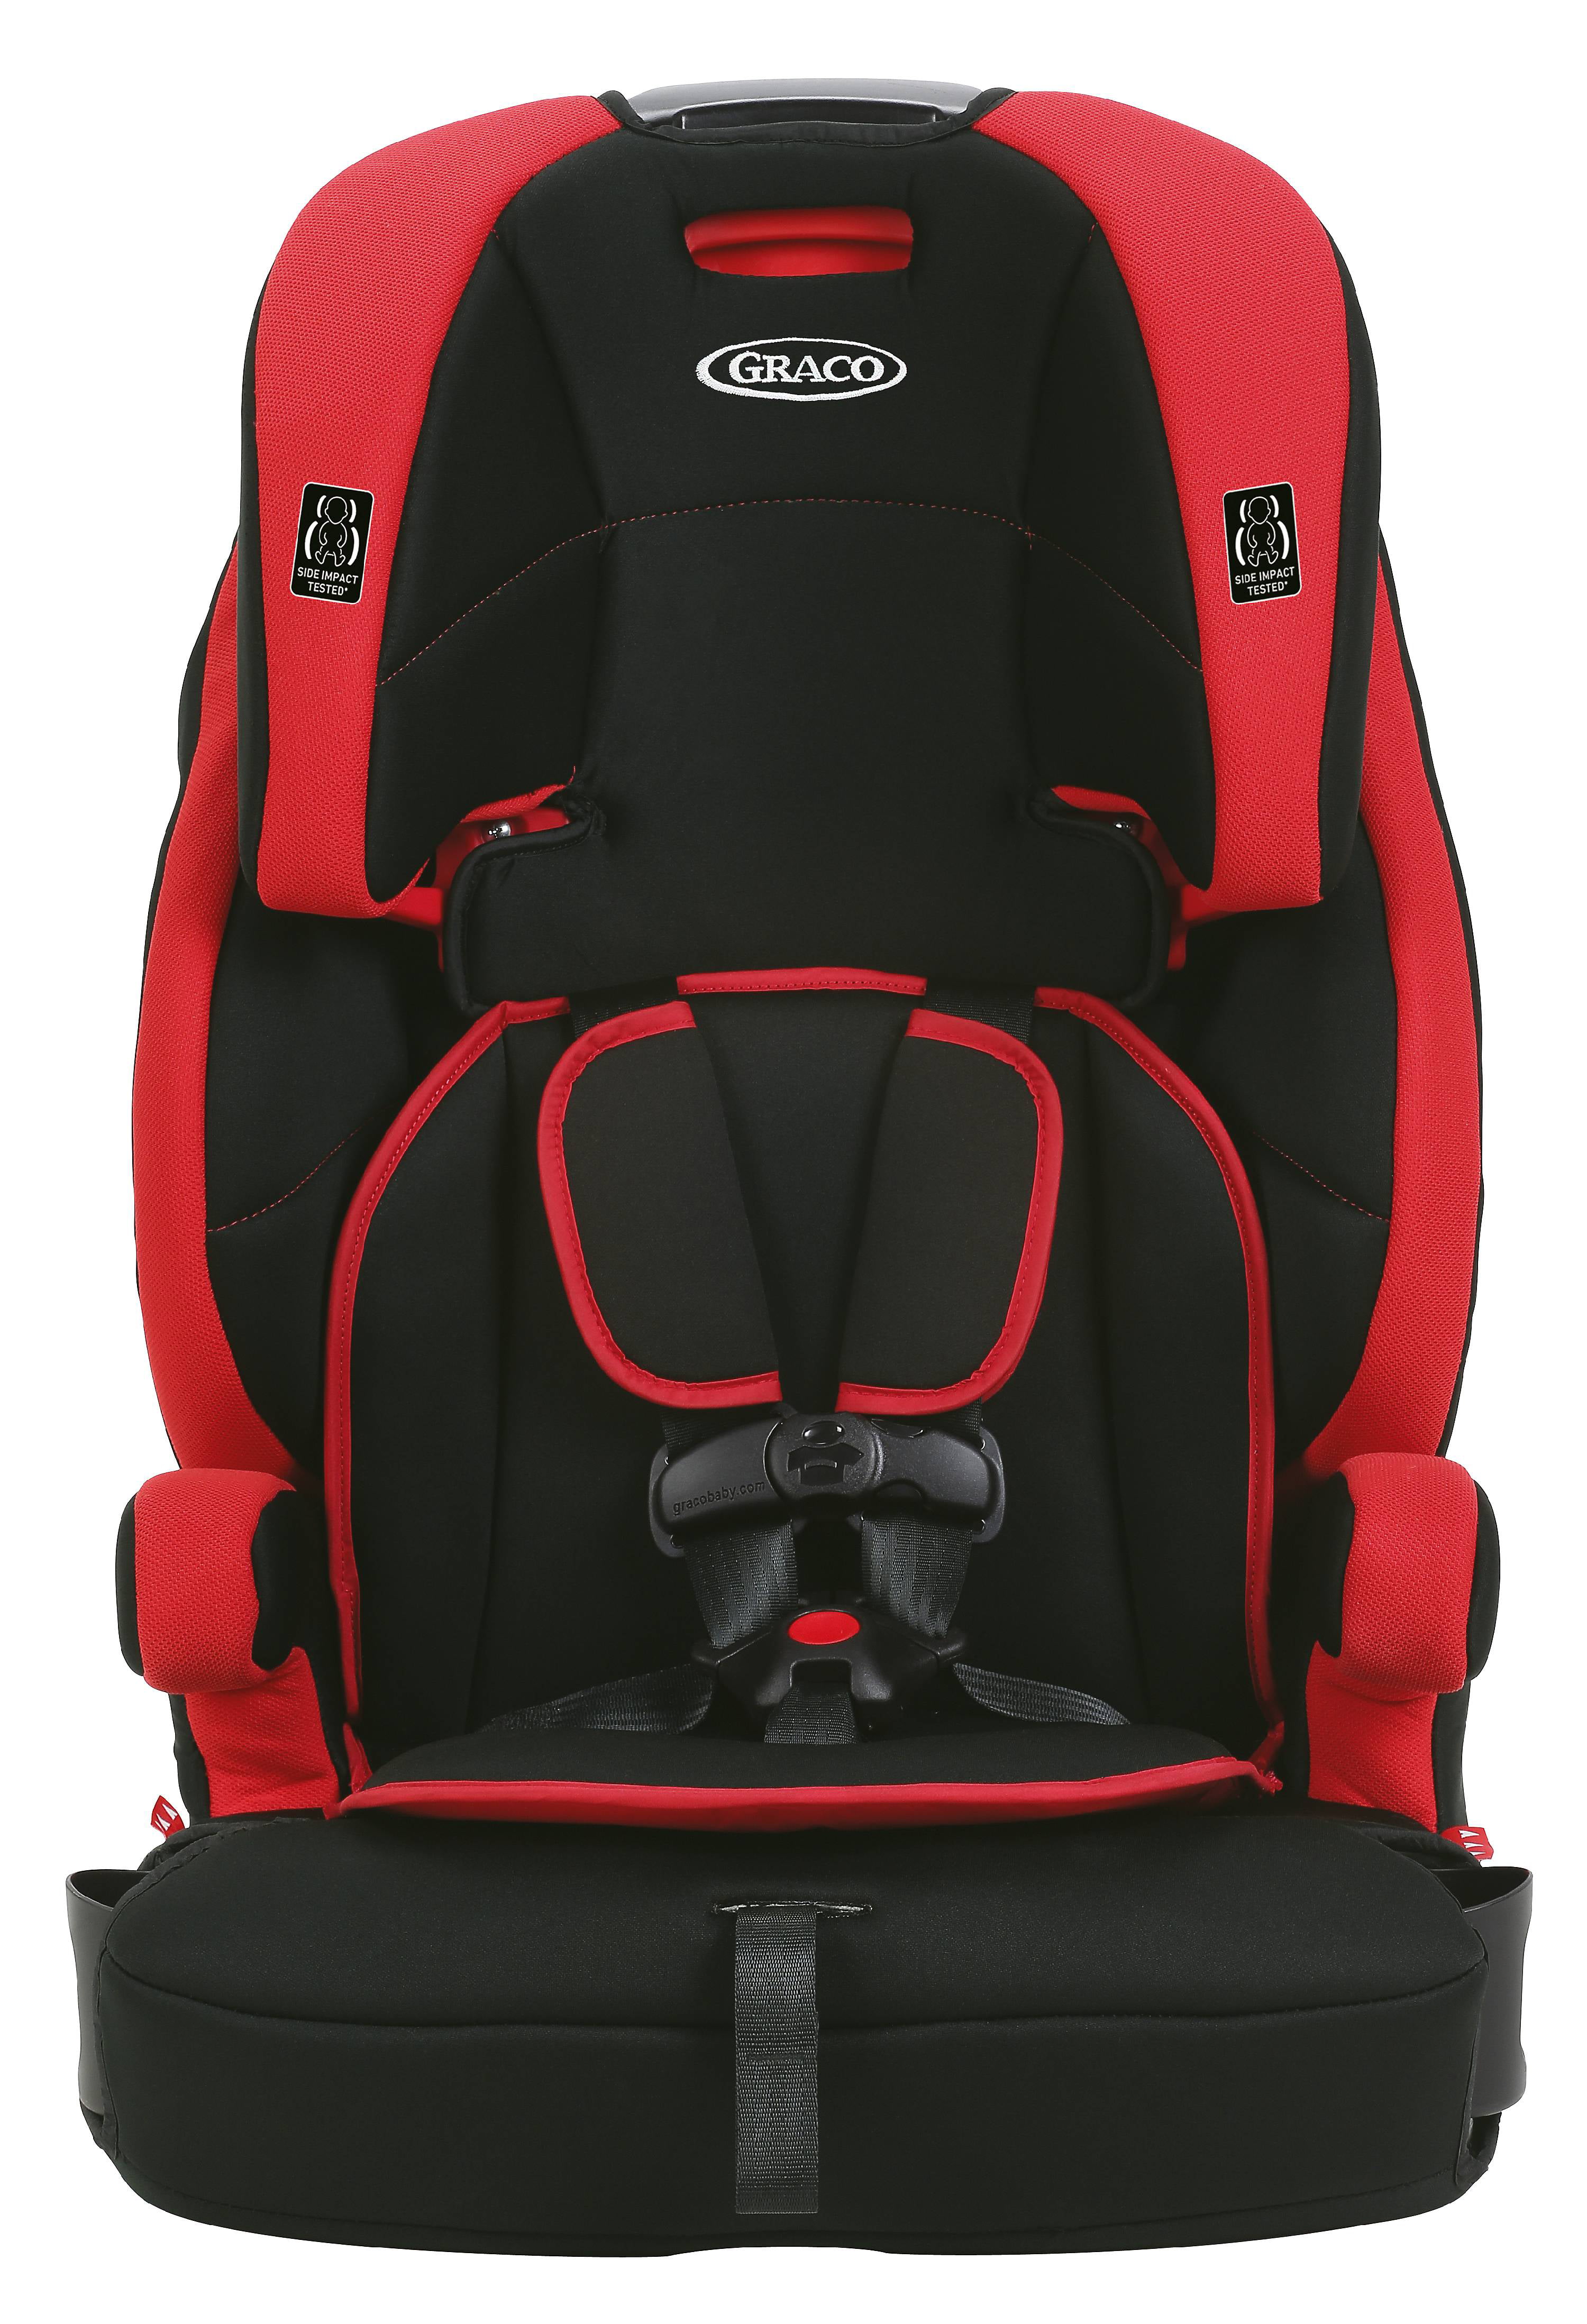 Graco Harness Booster Car Seat 